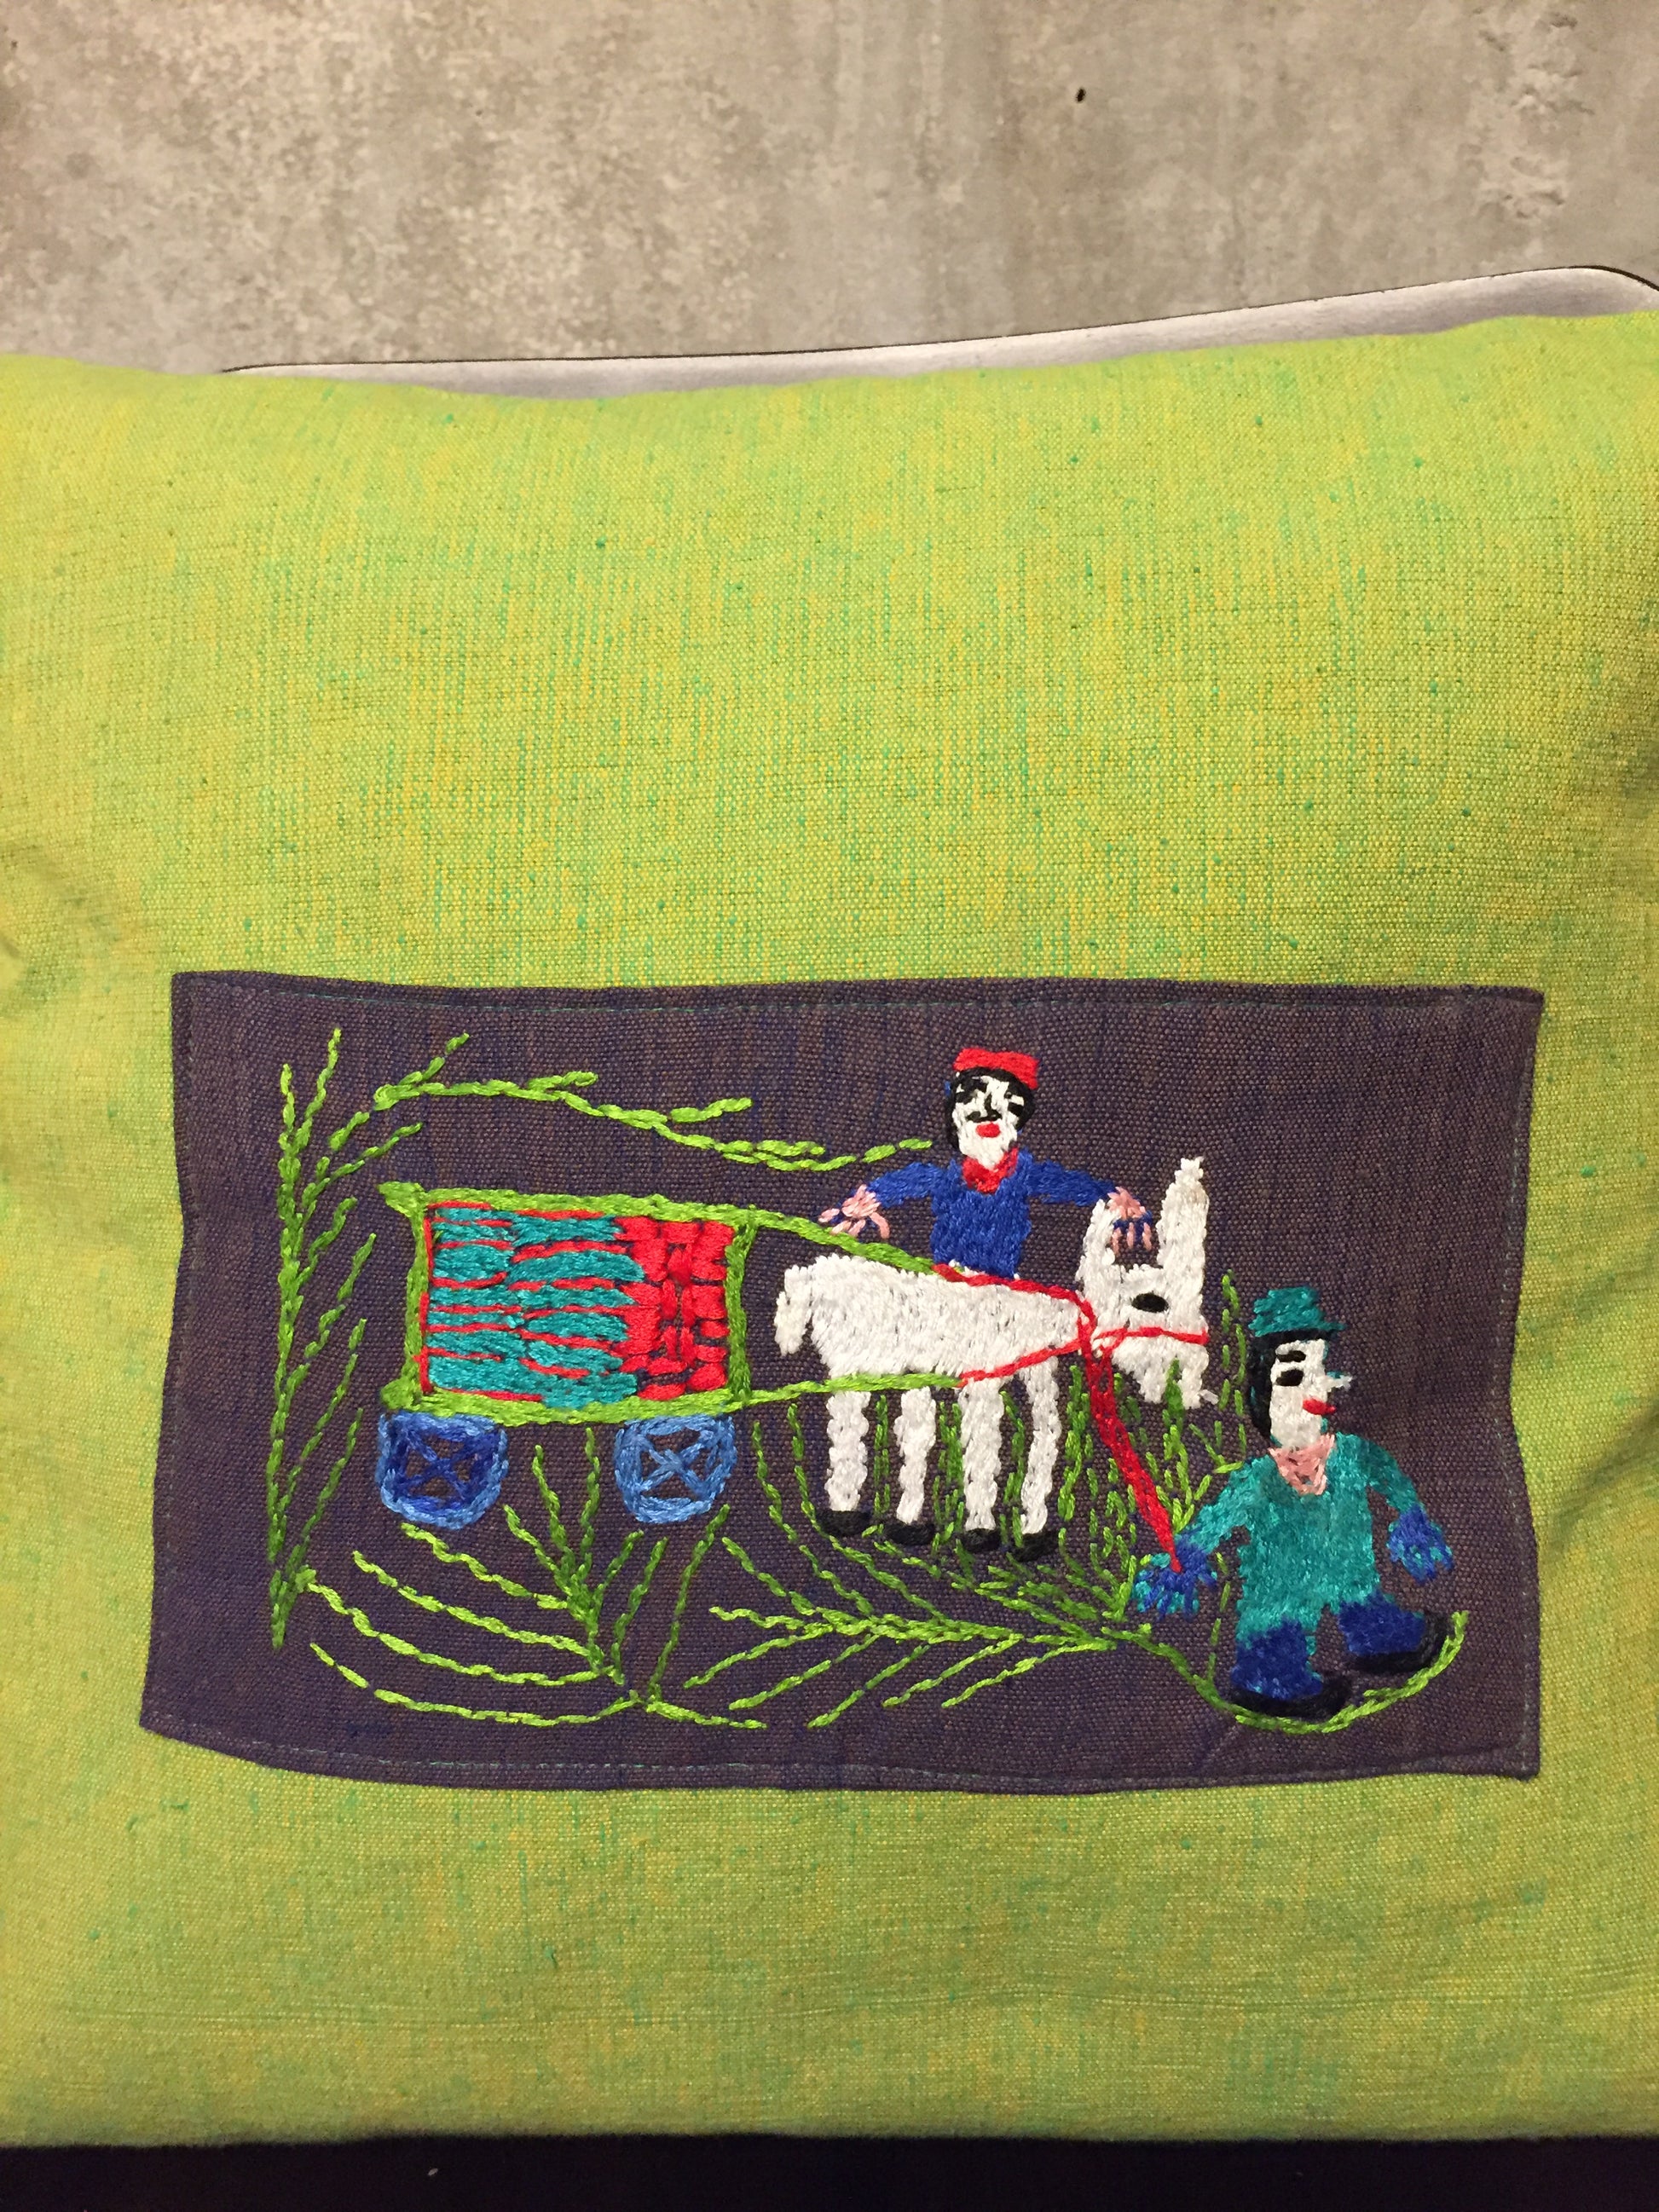 Handwoven Egyptian Cotton Cushion Cover - Hand Embroidered Art - Donkey Drawn Cart